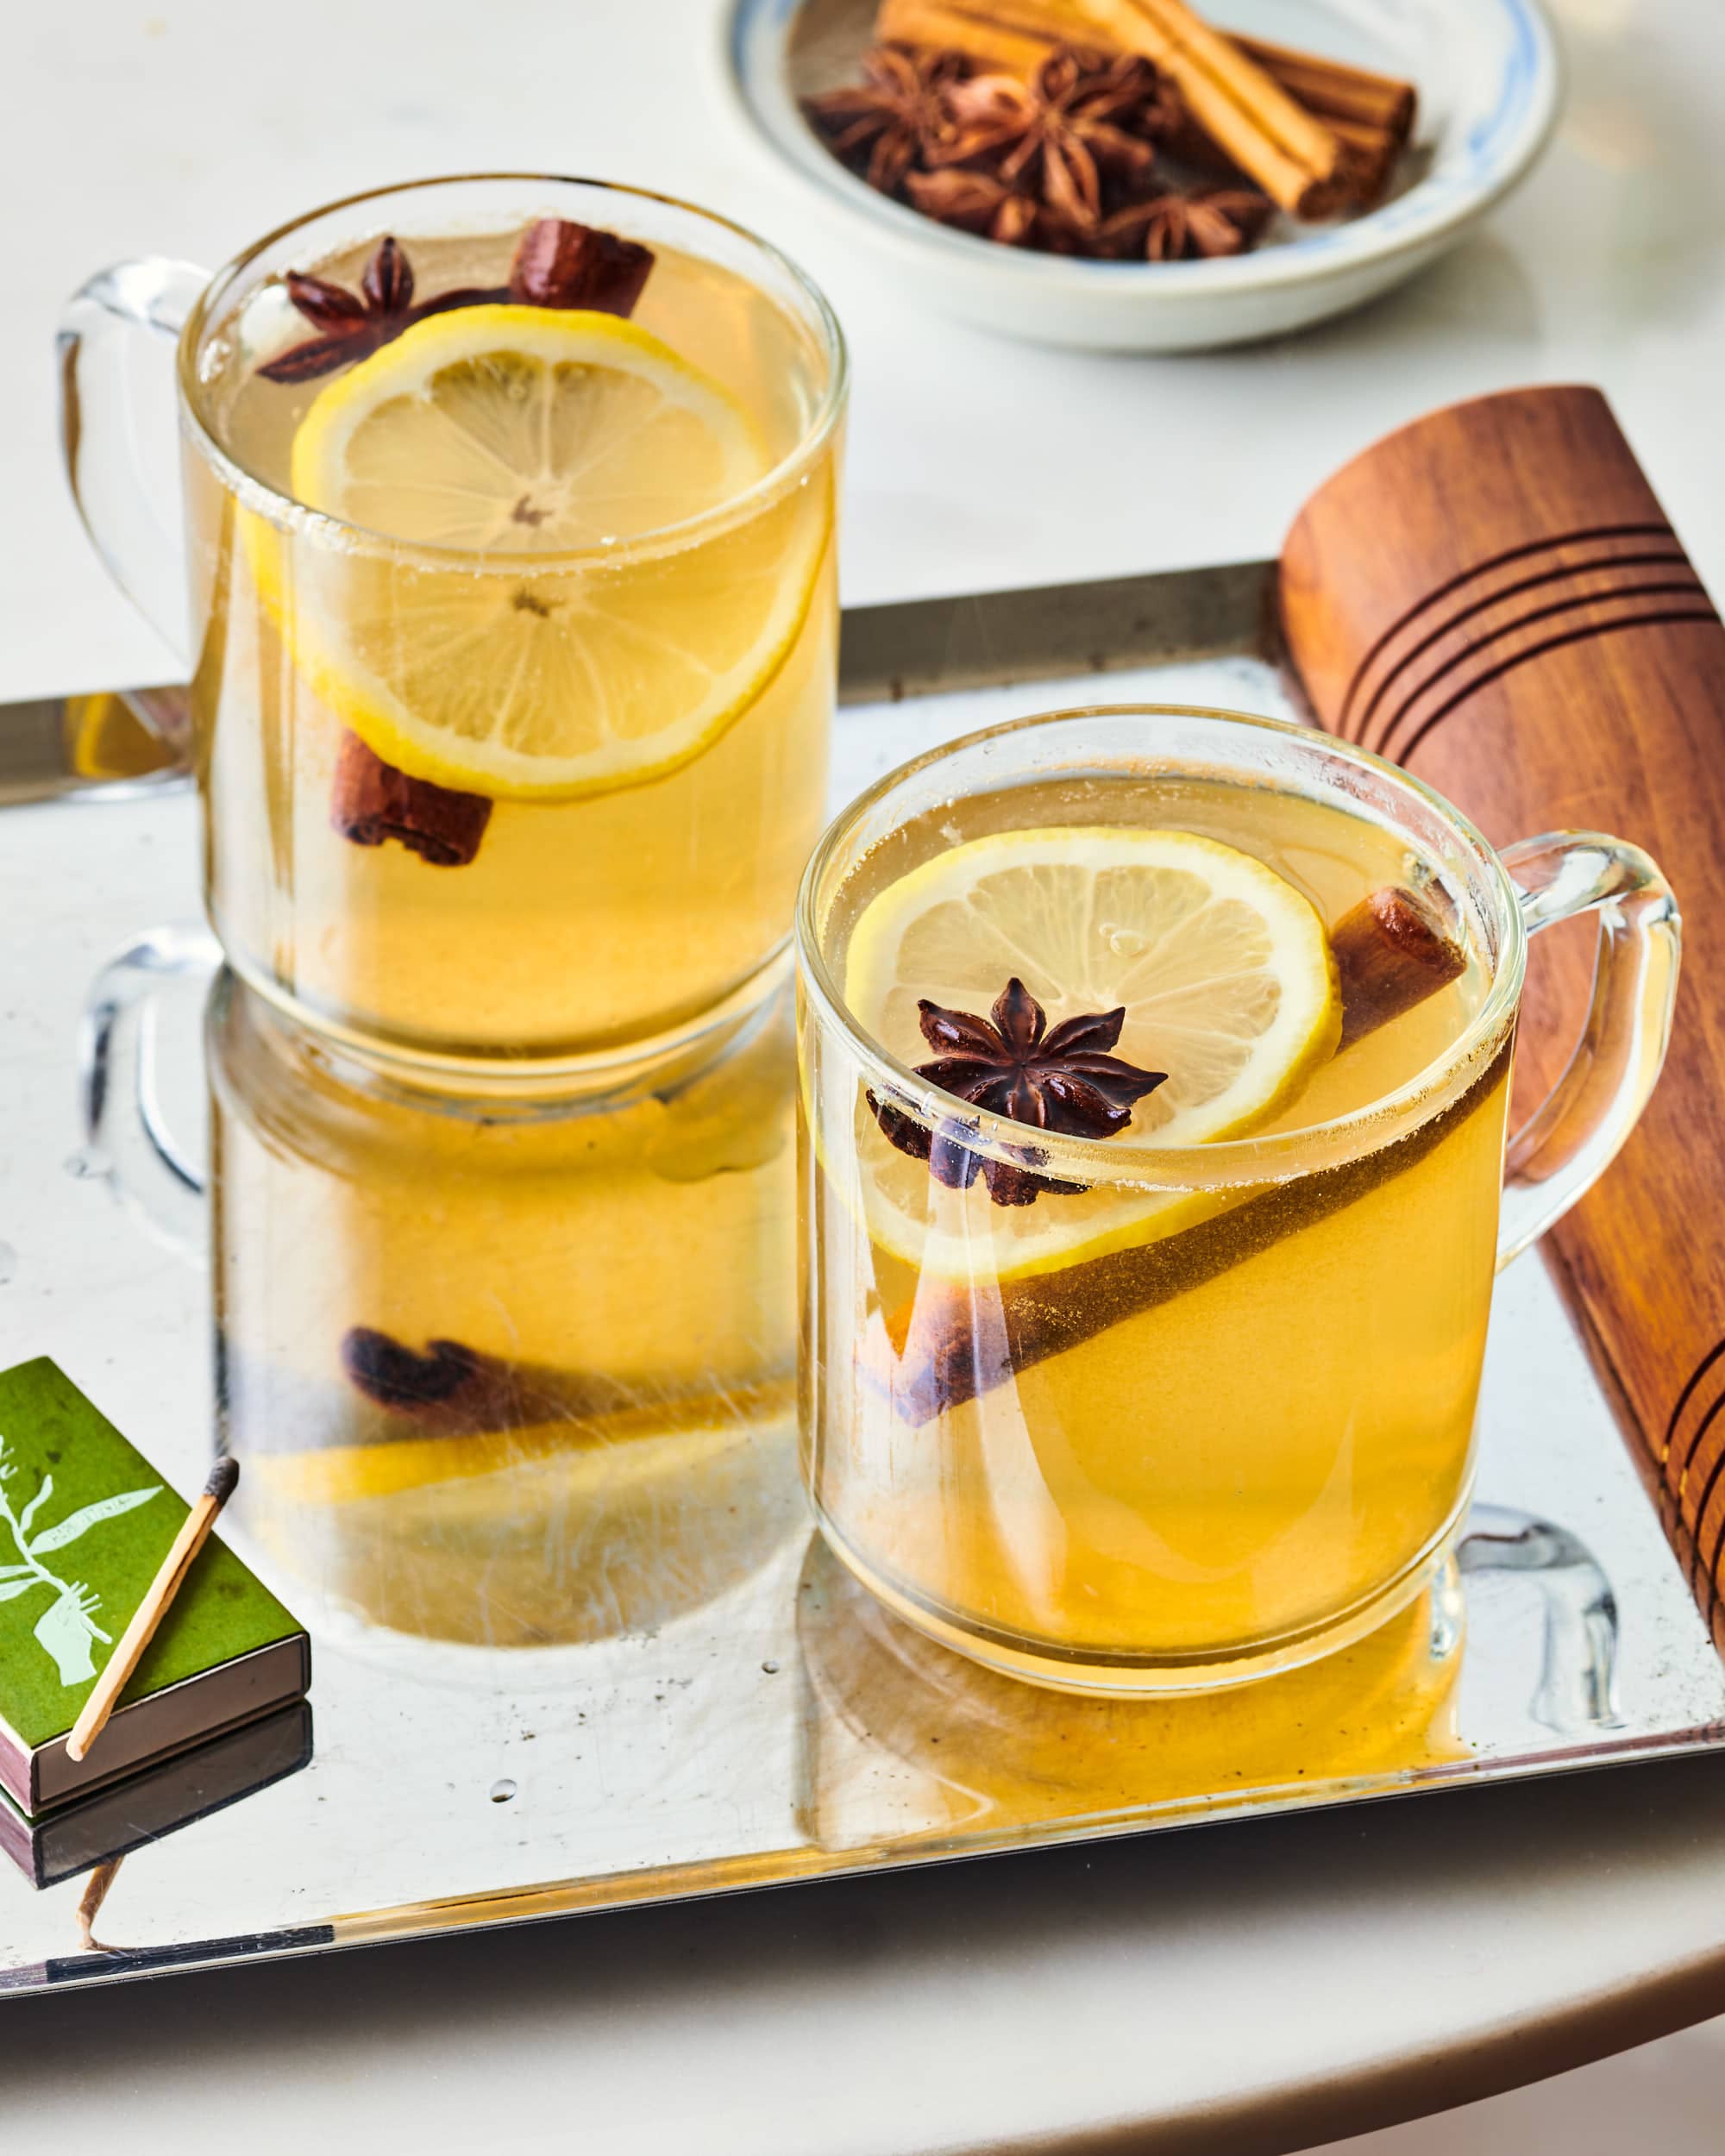 https://cdn.apartmenttherapy.info/image/upload/v1617049094/k/Photo/Recipes/2021-03-how-to-hot-toddy/RESHOOT/2021-03-23_ATK_47259.jpg